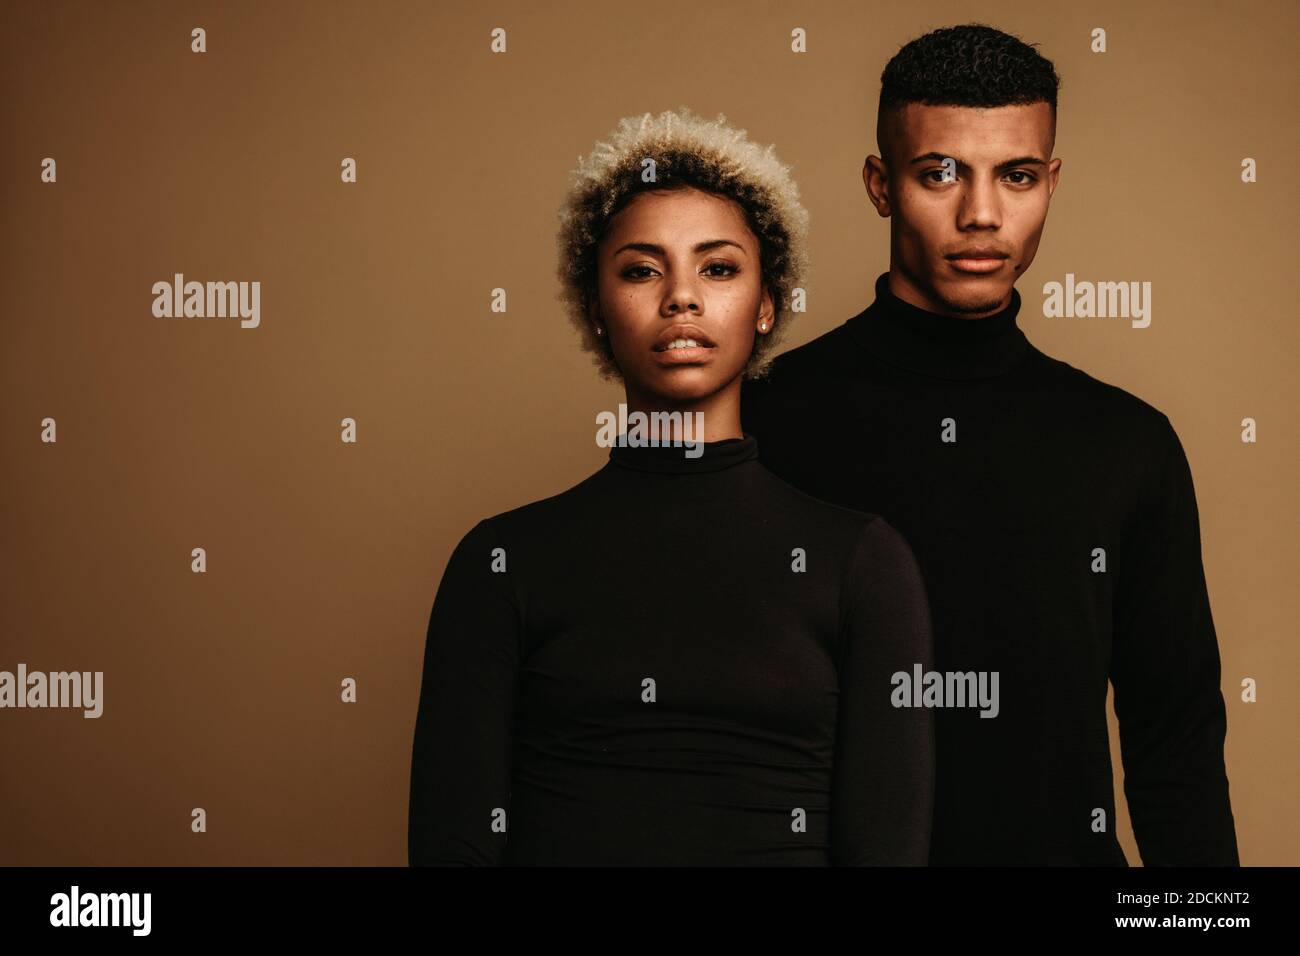 Couple on brown background in black clothes. Portrait of african american man and woman. Stock Photo